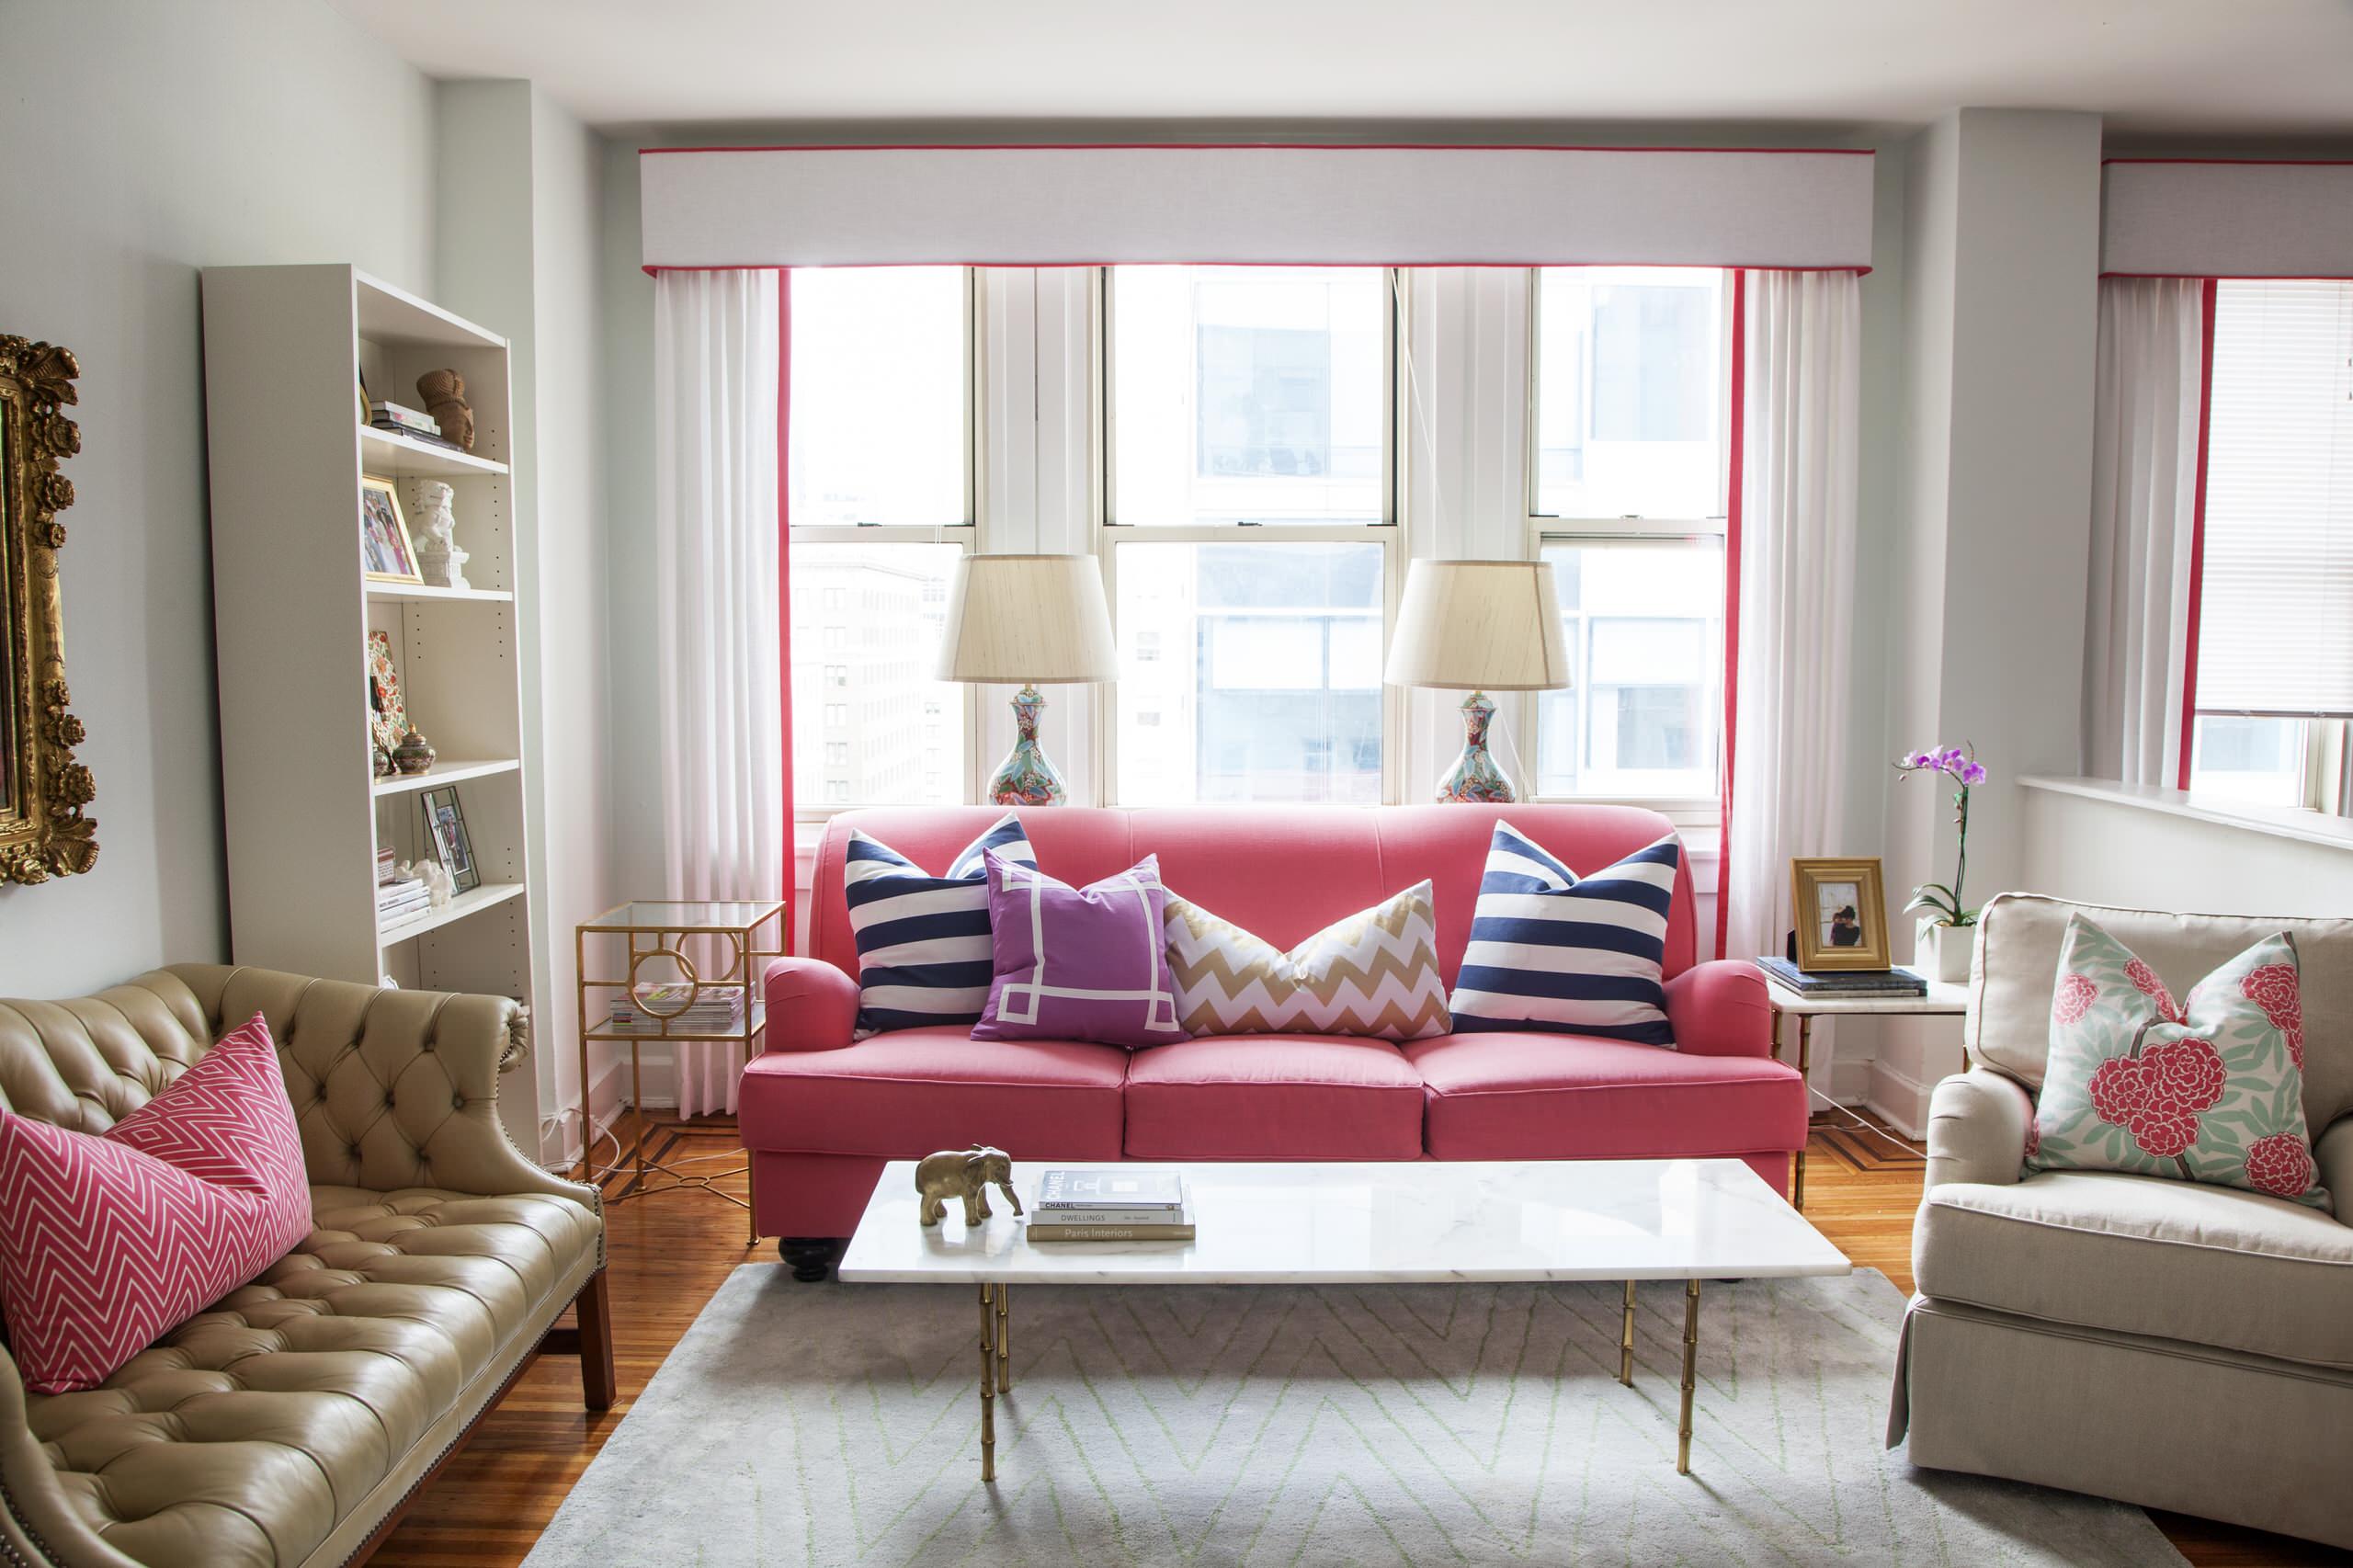 Hot pink Chairs - Eclectic - living room - Nest Instinctual Interiors